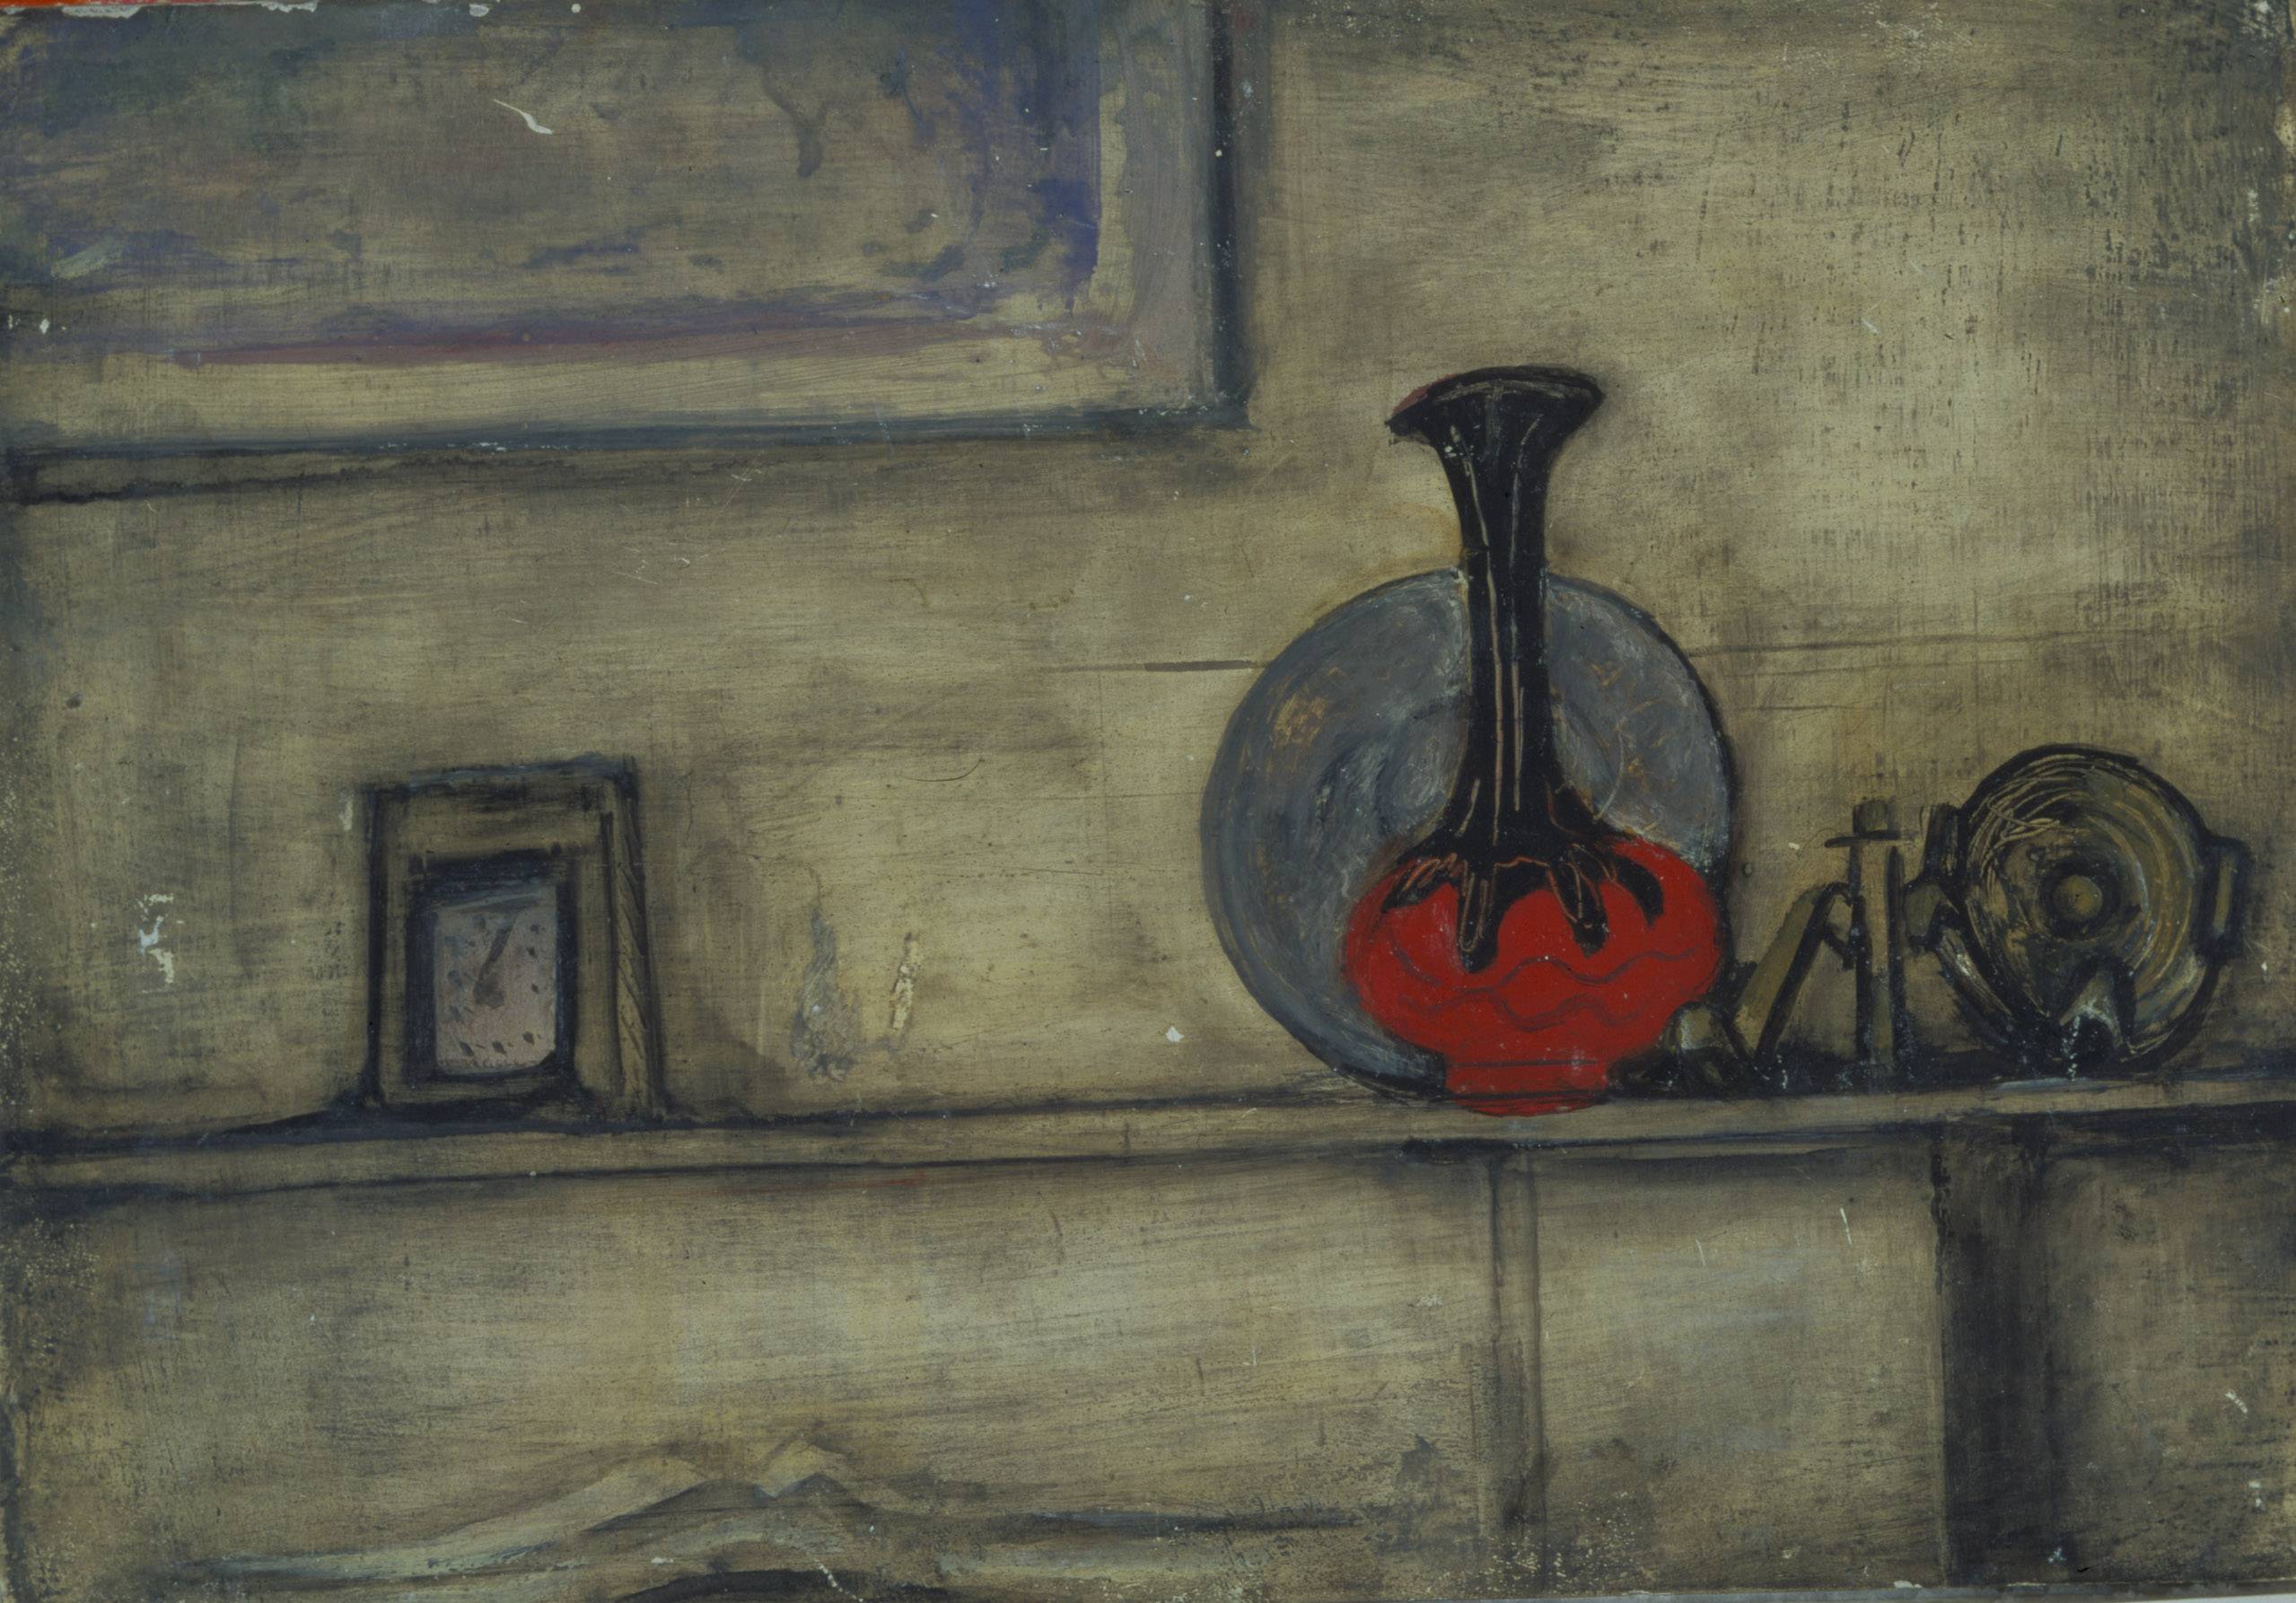 picture for Mark Rothko, Untitled (Still-life with Clock and Vase), 1938/1939, Oil on gesso board, 12 ¼ x 15 ⅜ x 1 ⅜ in. (framed), Copyright ©1998 Kate Rothko Prizel and Christopher Rothko